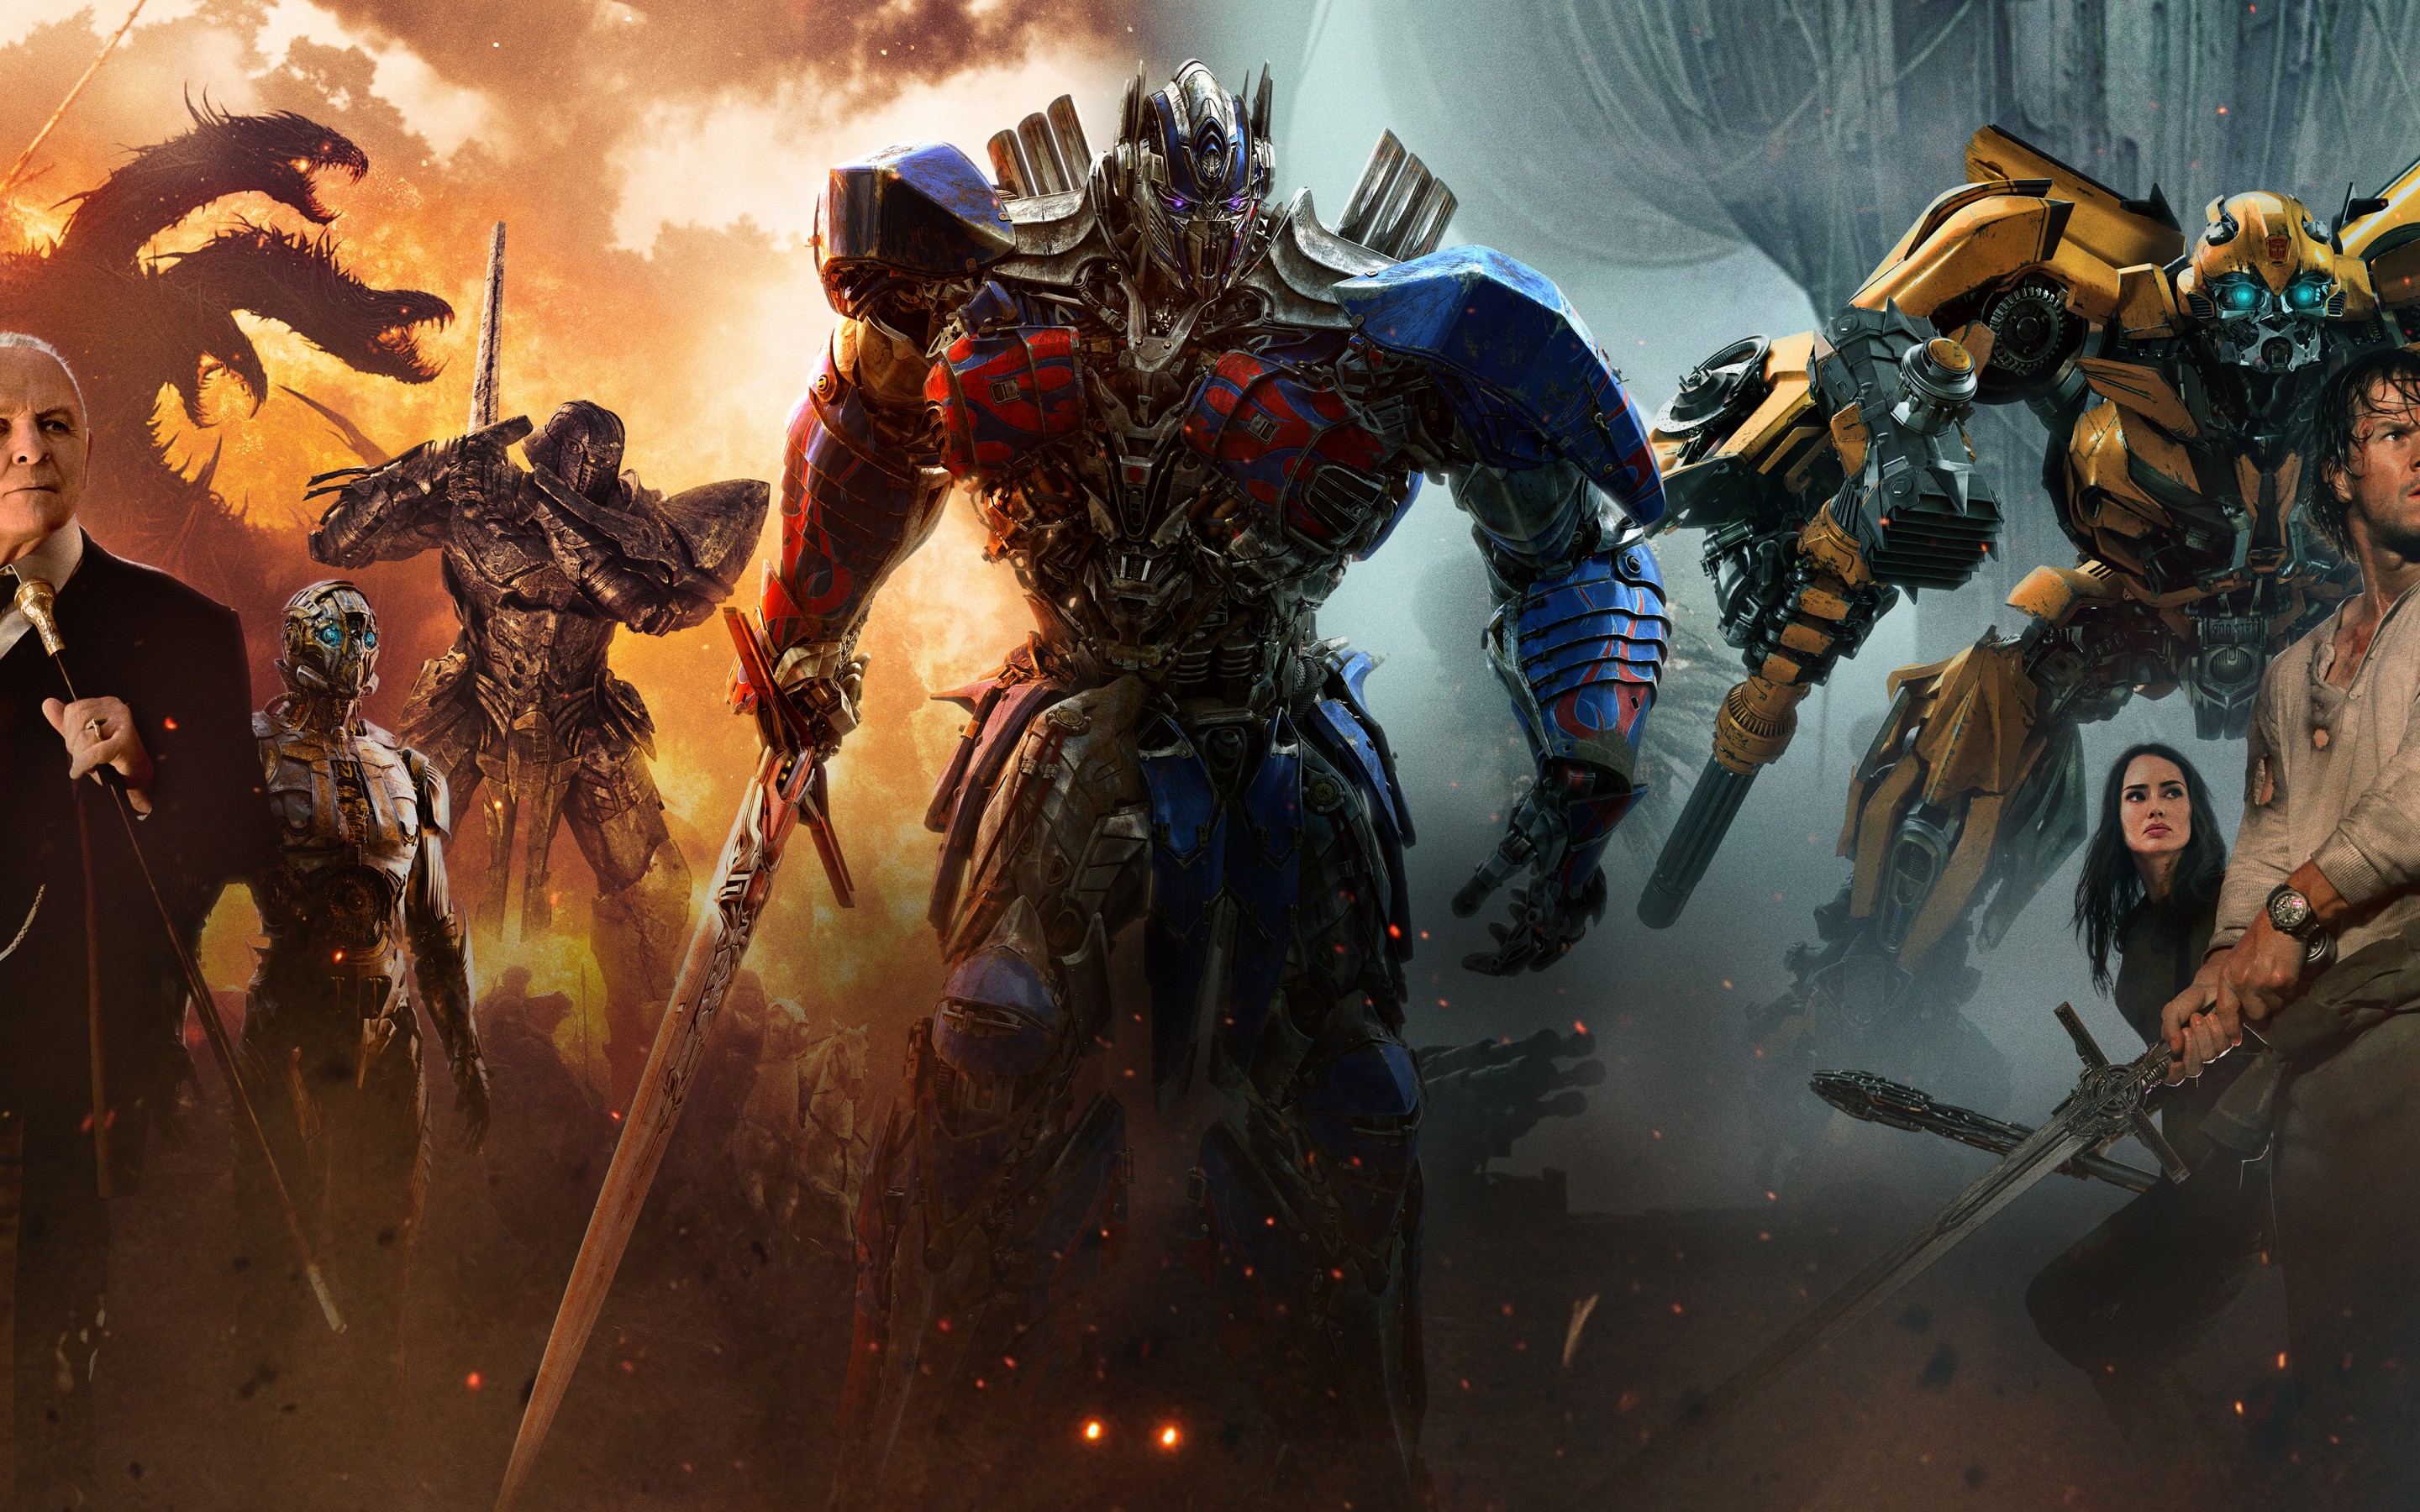 transformers 4k wallpapers,action adventure game,cg artwork,demon,fictional character,mythology